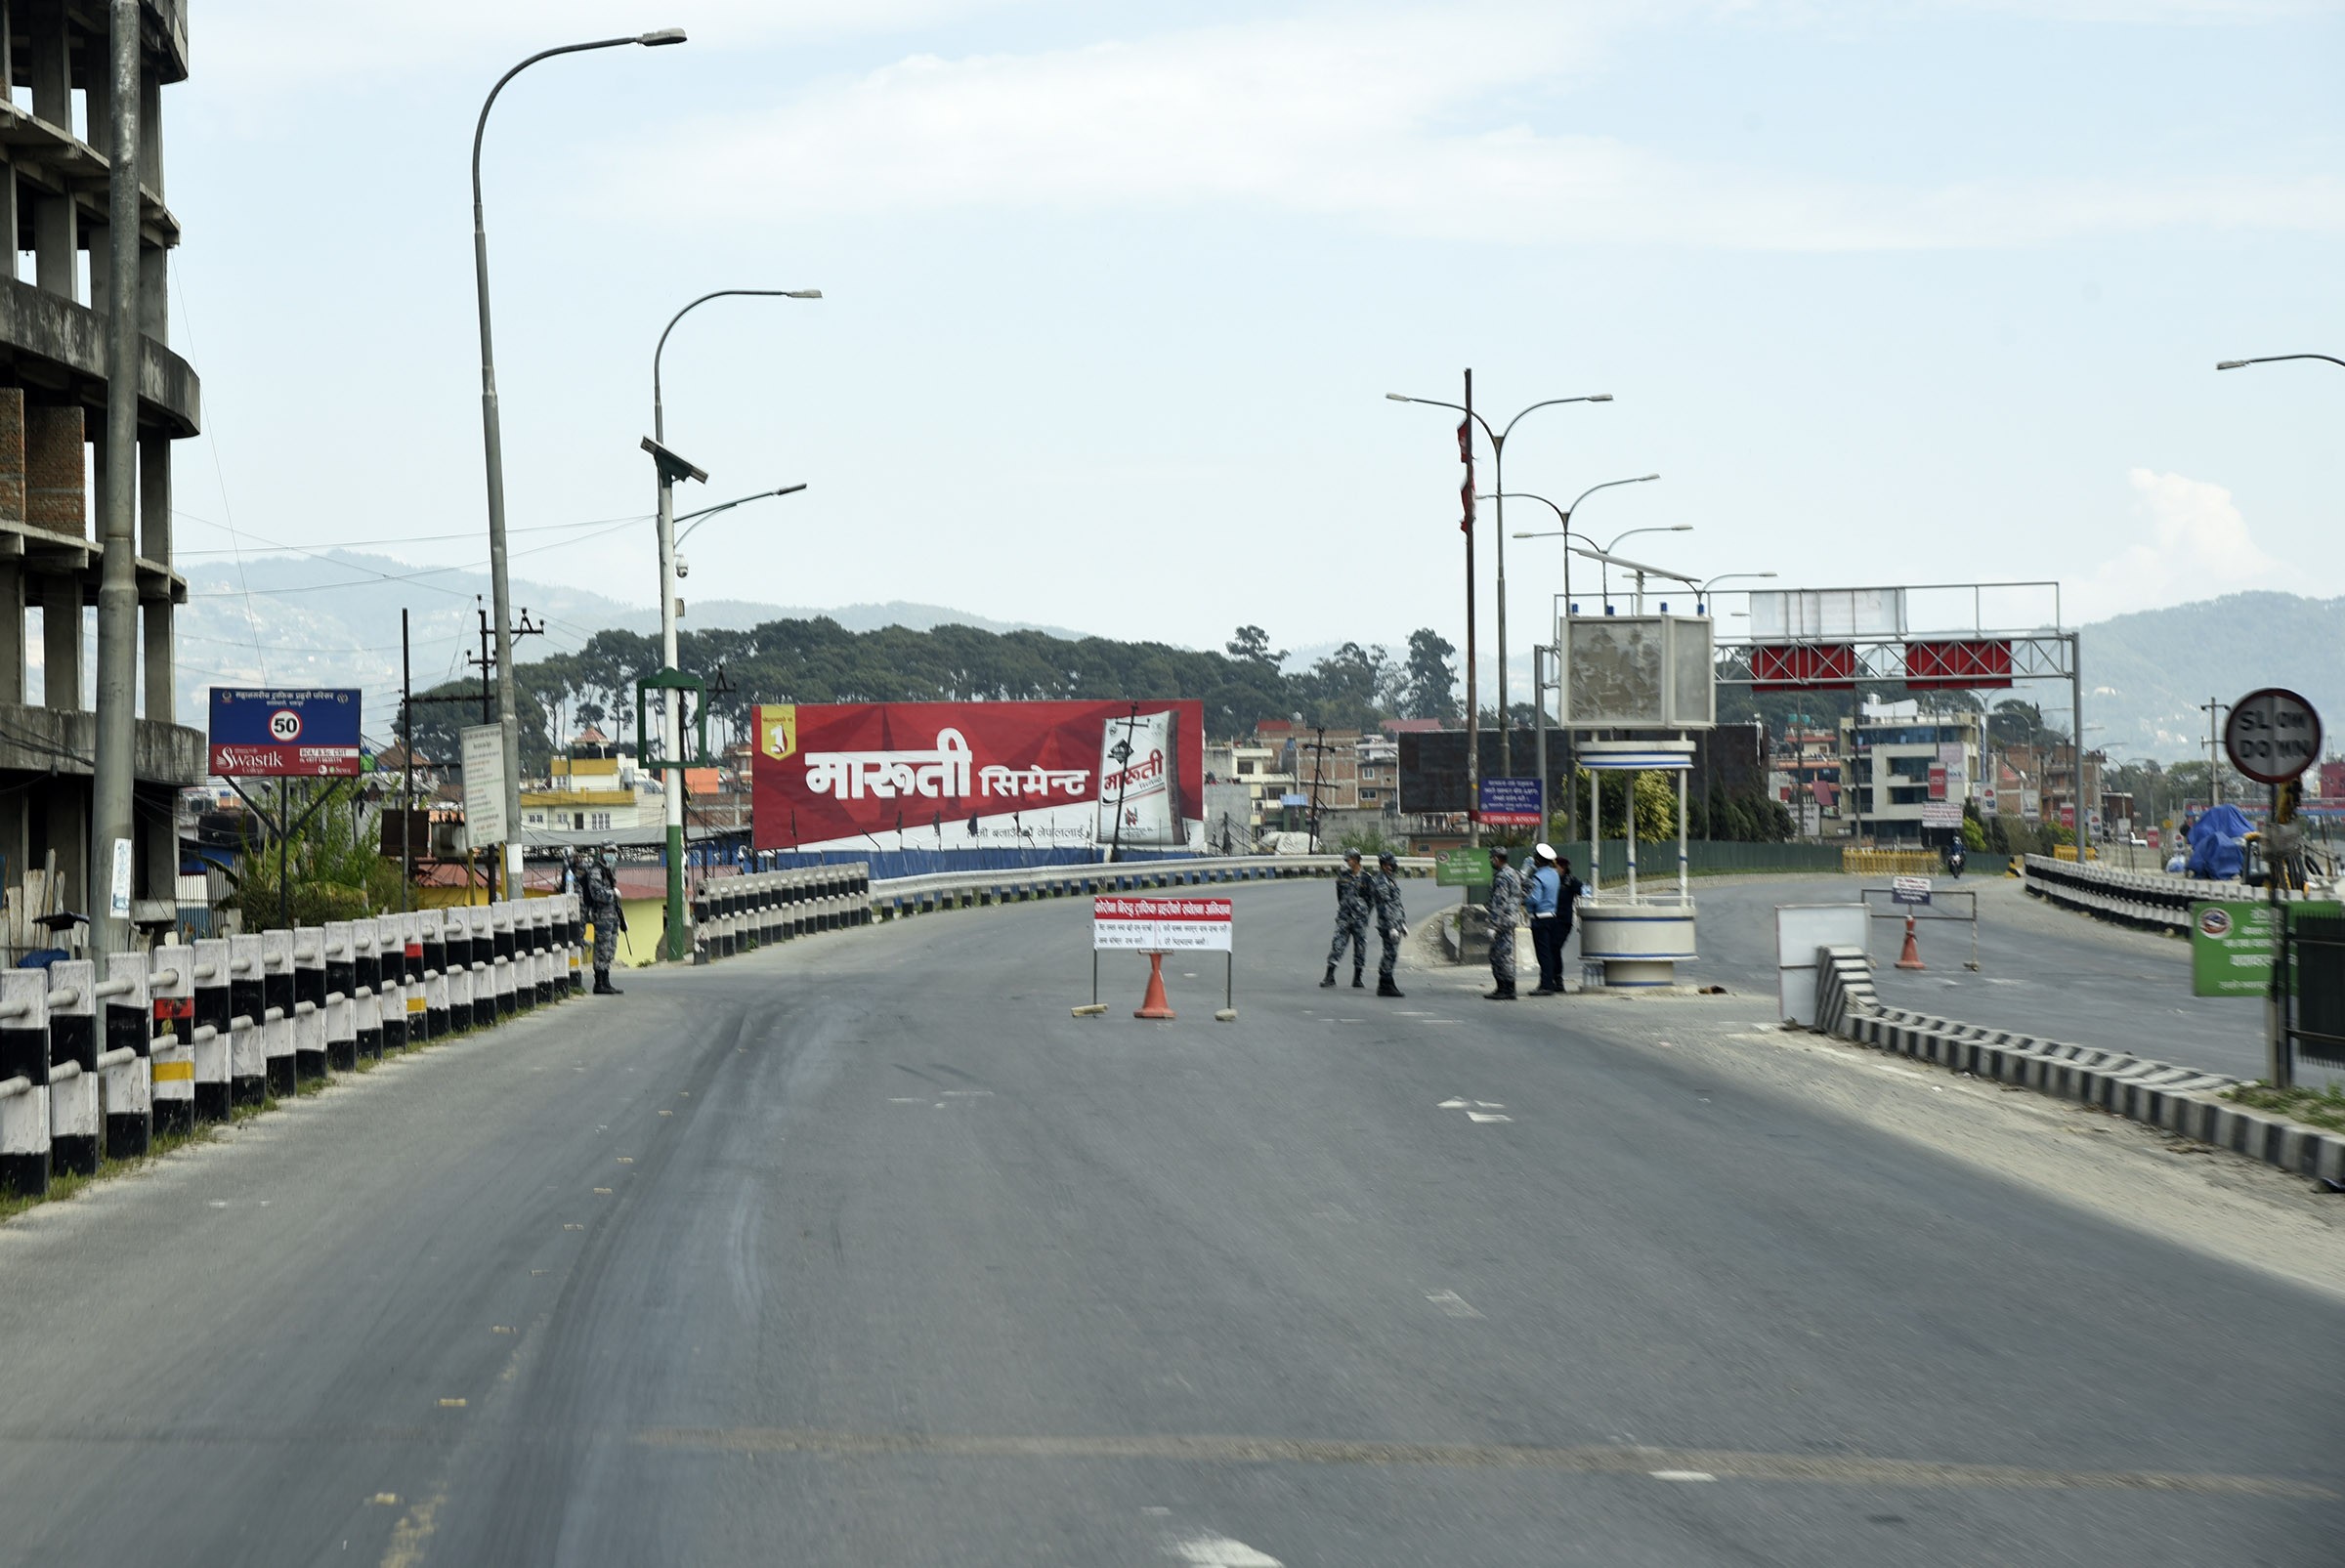 prohibitory-order-enforced-in-kathmandu-valley-from-today-even-peoples-mobility-is-restricted